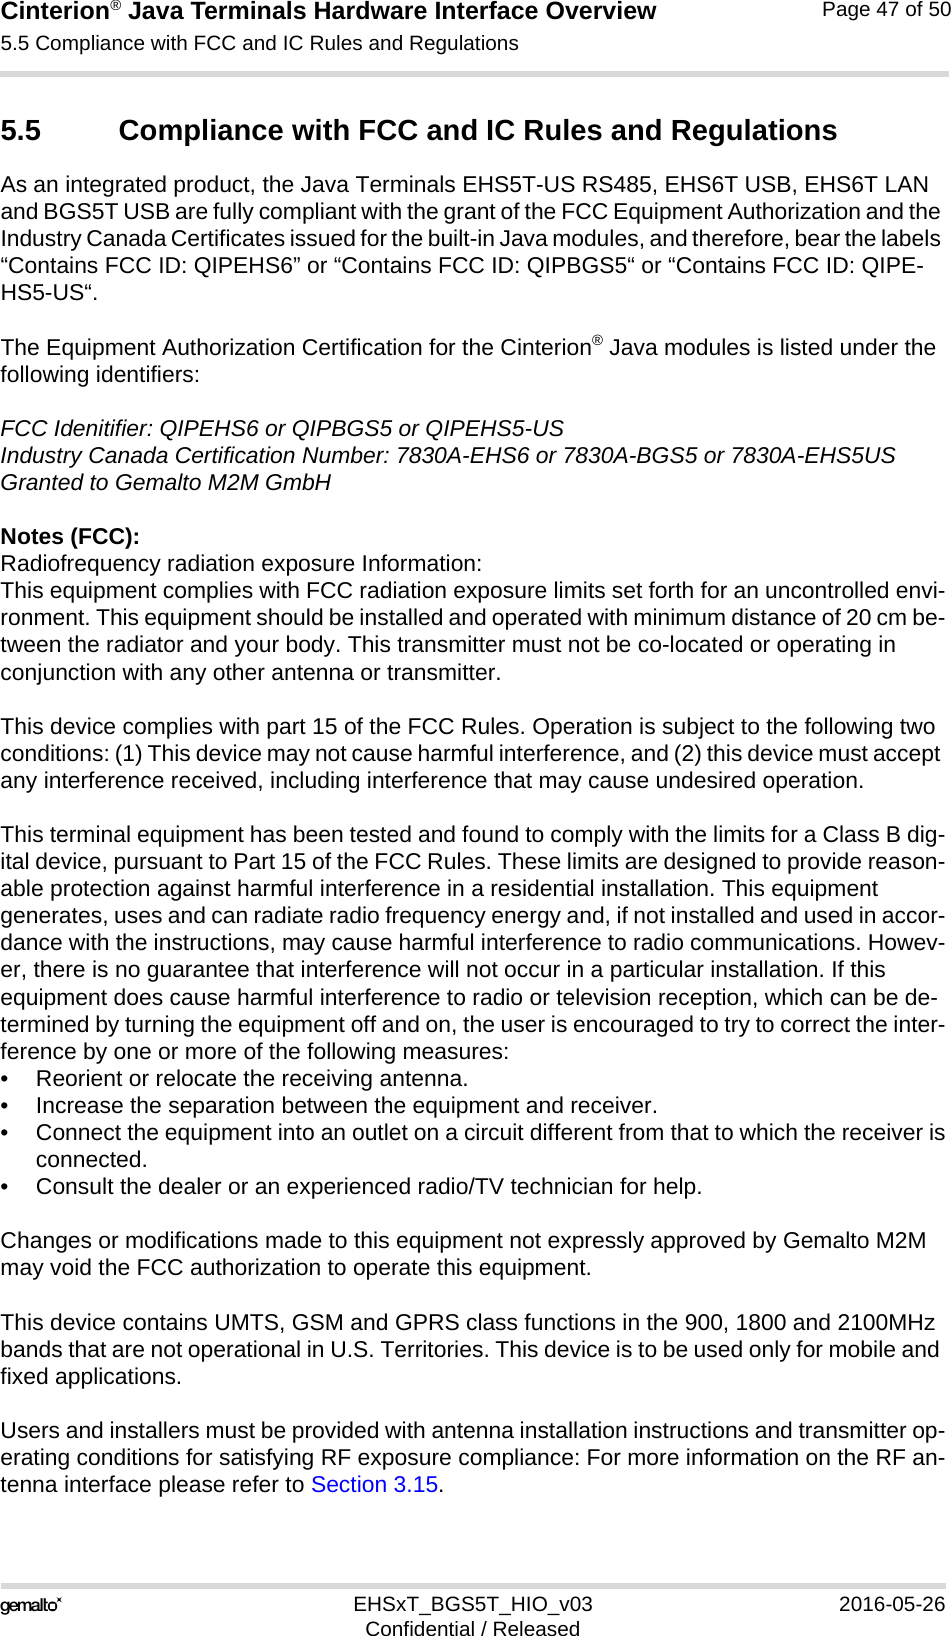 Cinterion® Java Terminals Hardware Interface Overview5.5 Compliance with FCC and IC Rules and Regulations48EHSxT_BGS5T_HIO_v03 2016-05-26Confidential / ReleasedPage 47 of 505.5 Compliance with FCC and IC Rules and RegulationsAs an integrated product, the Java Terminals EHS5T-US RS485, EHS6T USB, EHS6T LAN and BGS5T USB are fully compliant with the grant of the FCC Equipment Authorization and the Industry Canada Certificates issued for the built-in Java modules, and therefore, bear the labels “Contains FCC ID: QIPEHS6” or “Contains FCC ID: QIPBGS5“ or “Contains FCC ID: QIPE-HS5-US“.The Equipment Authorization Certification for the Cinterion® Java modules is listed under the following identifiers:FCC Idenitifier: QIPEHS6 or QIPBGS5 or QIPEHS5-USIndustry Canada Certification Number: 7830A-EHS6 or 7830A-BGS5 or 7830A-EHS5USGranted to Gemalto M2M GmbHNotes (FCC): Radiofrequency radiation exposure Information:This equipment complies with FCC radiation exposure limits set forth for an uncontrolled envi-ronment. This equipment should be installed and operated with minimum distance of 20 cm be-tween the radiator and your body. This transmitter must not be co-located or operating in conjunction with any other antenna or transmitter.This device complies with part 15 of the FCC Rules. Operation is subject to the following two conditions: (1) This device may not cause harmful interference, and (2) this device must accept any interference received, including interference that may cause undesired operation.This terminal equipment has been tested and found to comply with the limits for a Class B dig-ital device, pursuant to Part 15 of the FCC Rules. These limits are designed to provide reason-able protection against harmful interference in a residential installation. This equipment generates, uses and can radiate radio frequency energy and, if not installed and used in accor-dance with the instructions, may cause harmful interference to radio communications. Howev-er, there is no guarantee that interference will not occur in a particular installation. If this equipment does cause harmful interference to radio or television reception, which can be de-termined by turning the equipment off and on, the user is encouraged to try to correct the inter-ference by one or more of the following measures:• Reorient or relocate the receiving antenna.• Increase the separation between the equipment and receiver.• Connect the equipment into an outlet on a circuit different from that to which the receiver isconnected.• Consult the dealer or an experienced radio/TV technician for help.Changes or modifications made to this equipment not expressly approved by Gemalto M2M may void the FCC authorization to operate this equipment. This device contains UMTS, GSM and GPRS class functions in the 900, 1800 and 2100MHz bands that are not operational in U.S. Territories. This device is to be used only for mobile and fixed applications.Users and installers must be provided with antenna installation instructions and transmitter op-erating conditions for satisfying RF exposure compliance: For more information on the RF an-tenna interface please refer to Section 3.15.